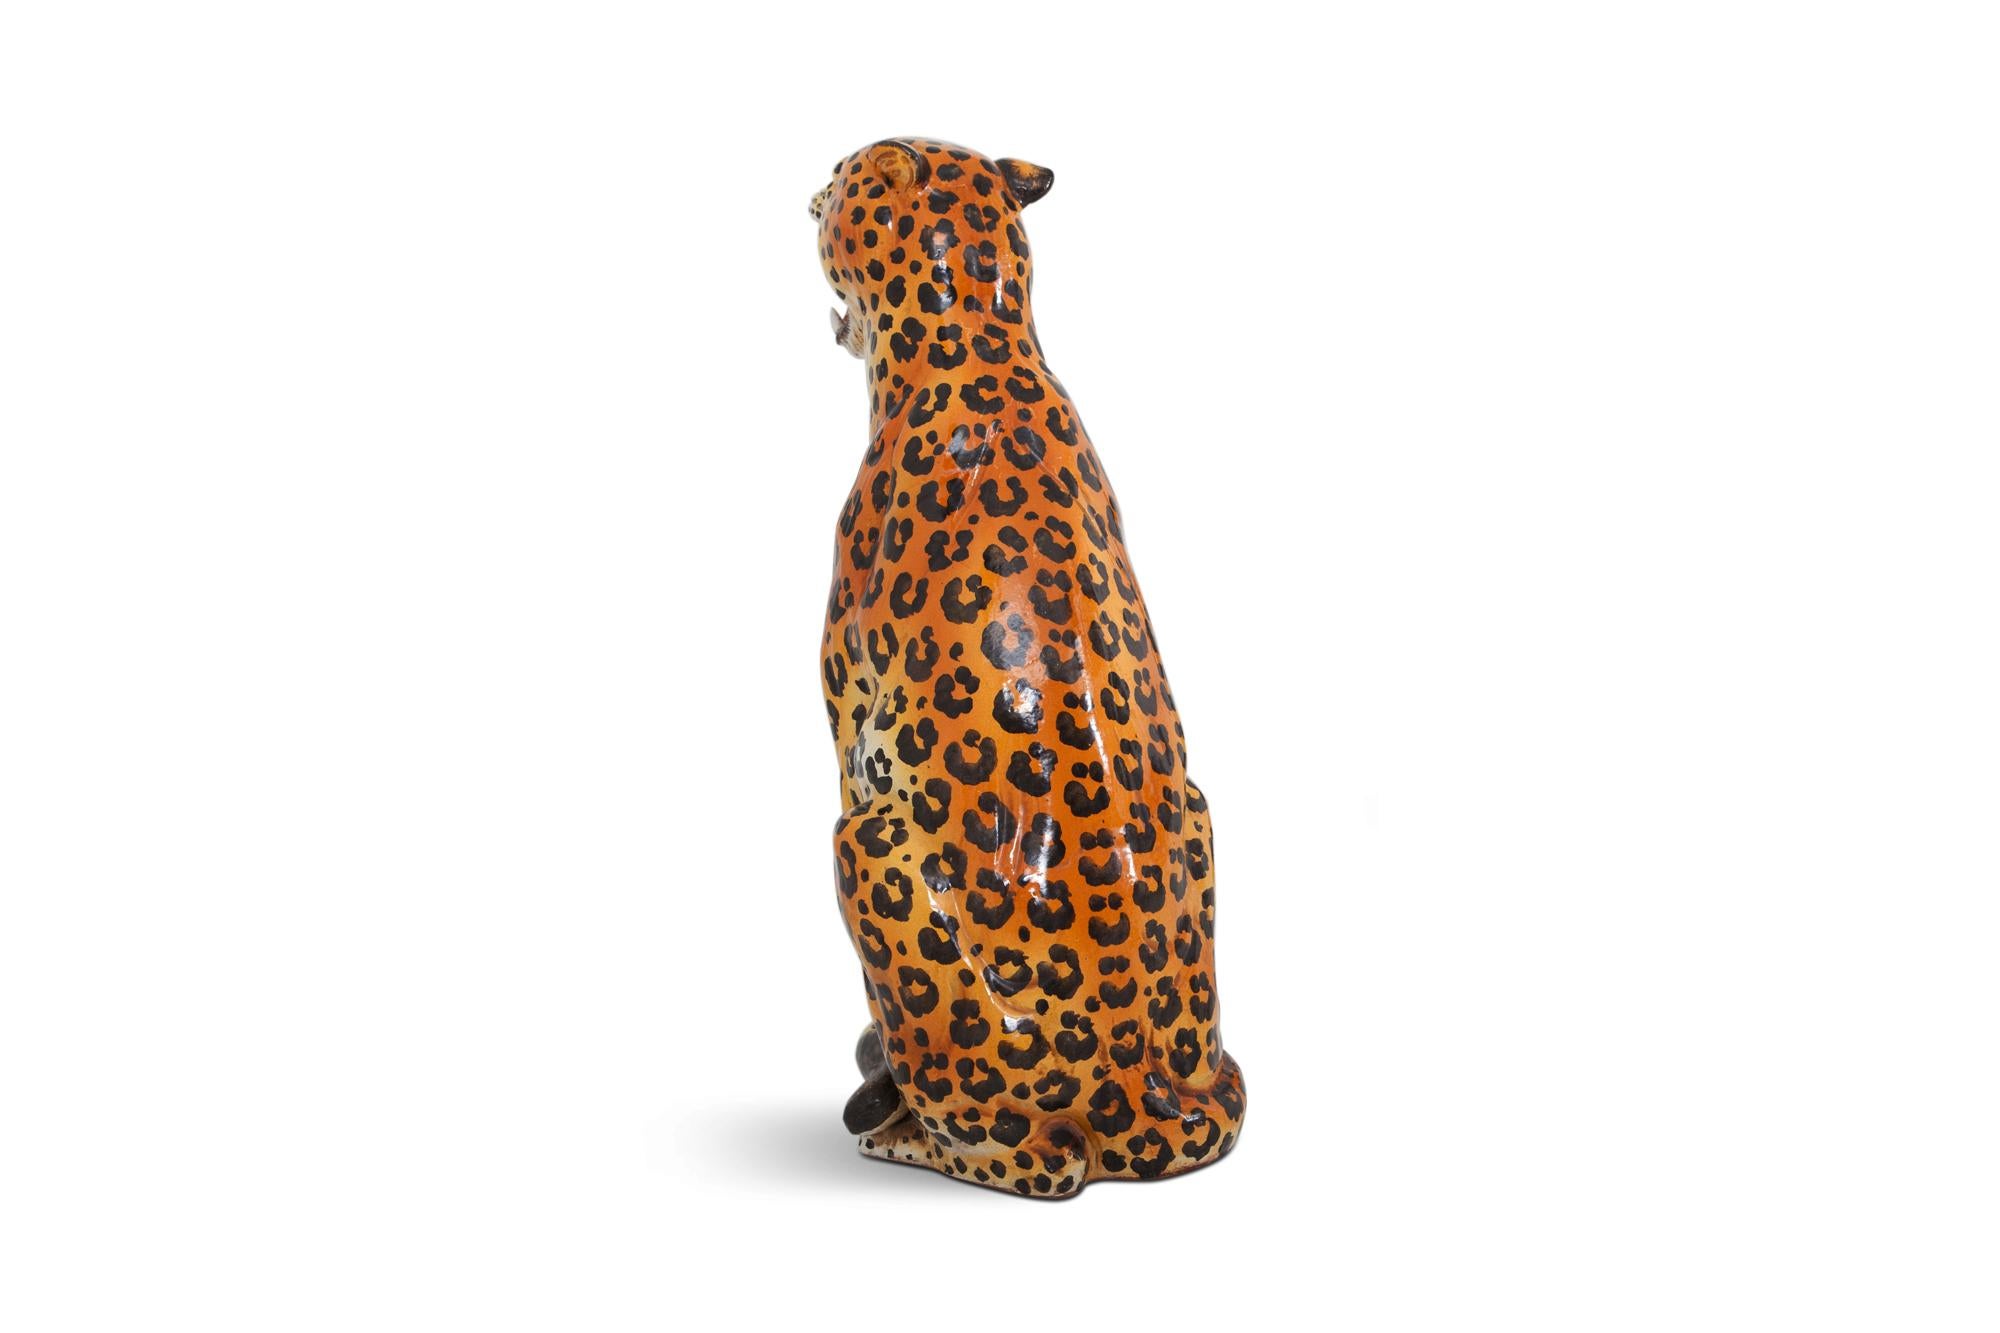 Leopard Ceramic Hand-Painted Sculptures from Italy, 1950s 3